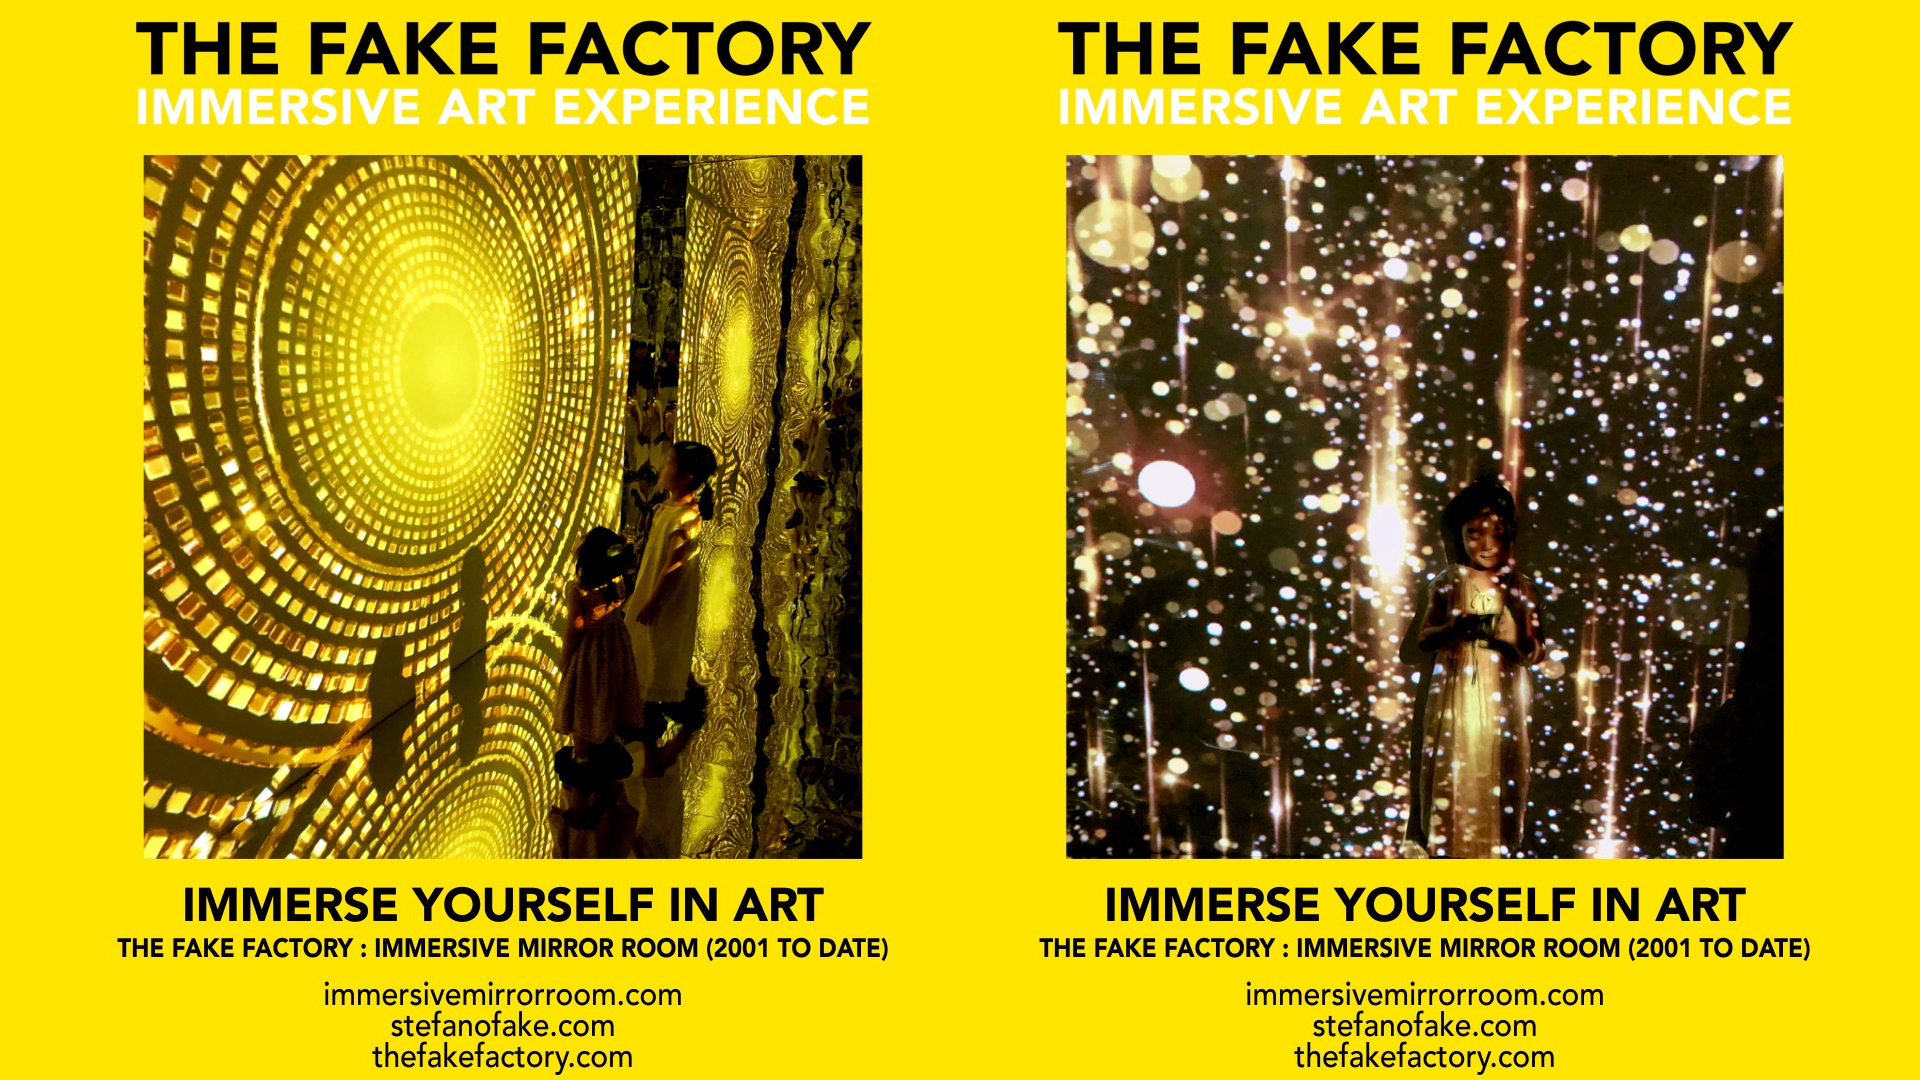 THE FAKE FACTORY IMMERSIVE ART EXPERIENCE 2012-2020 FORMAT.162